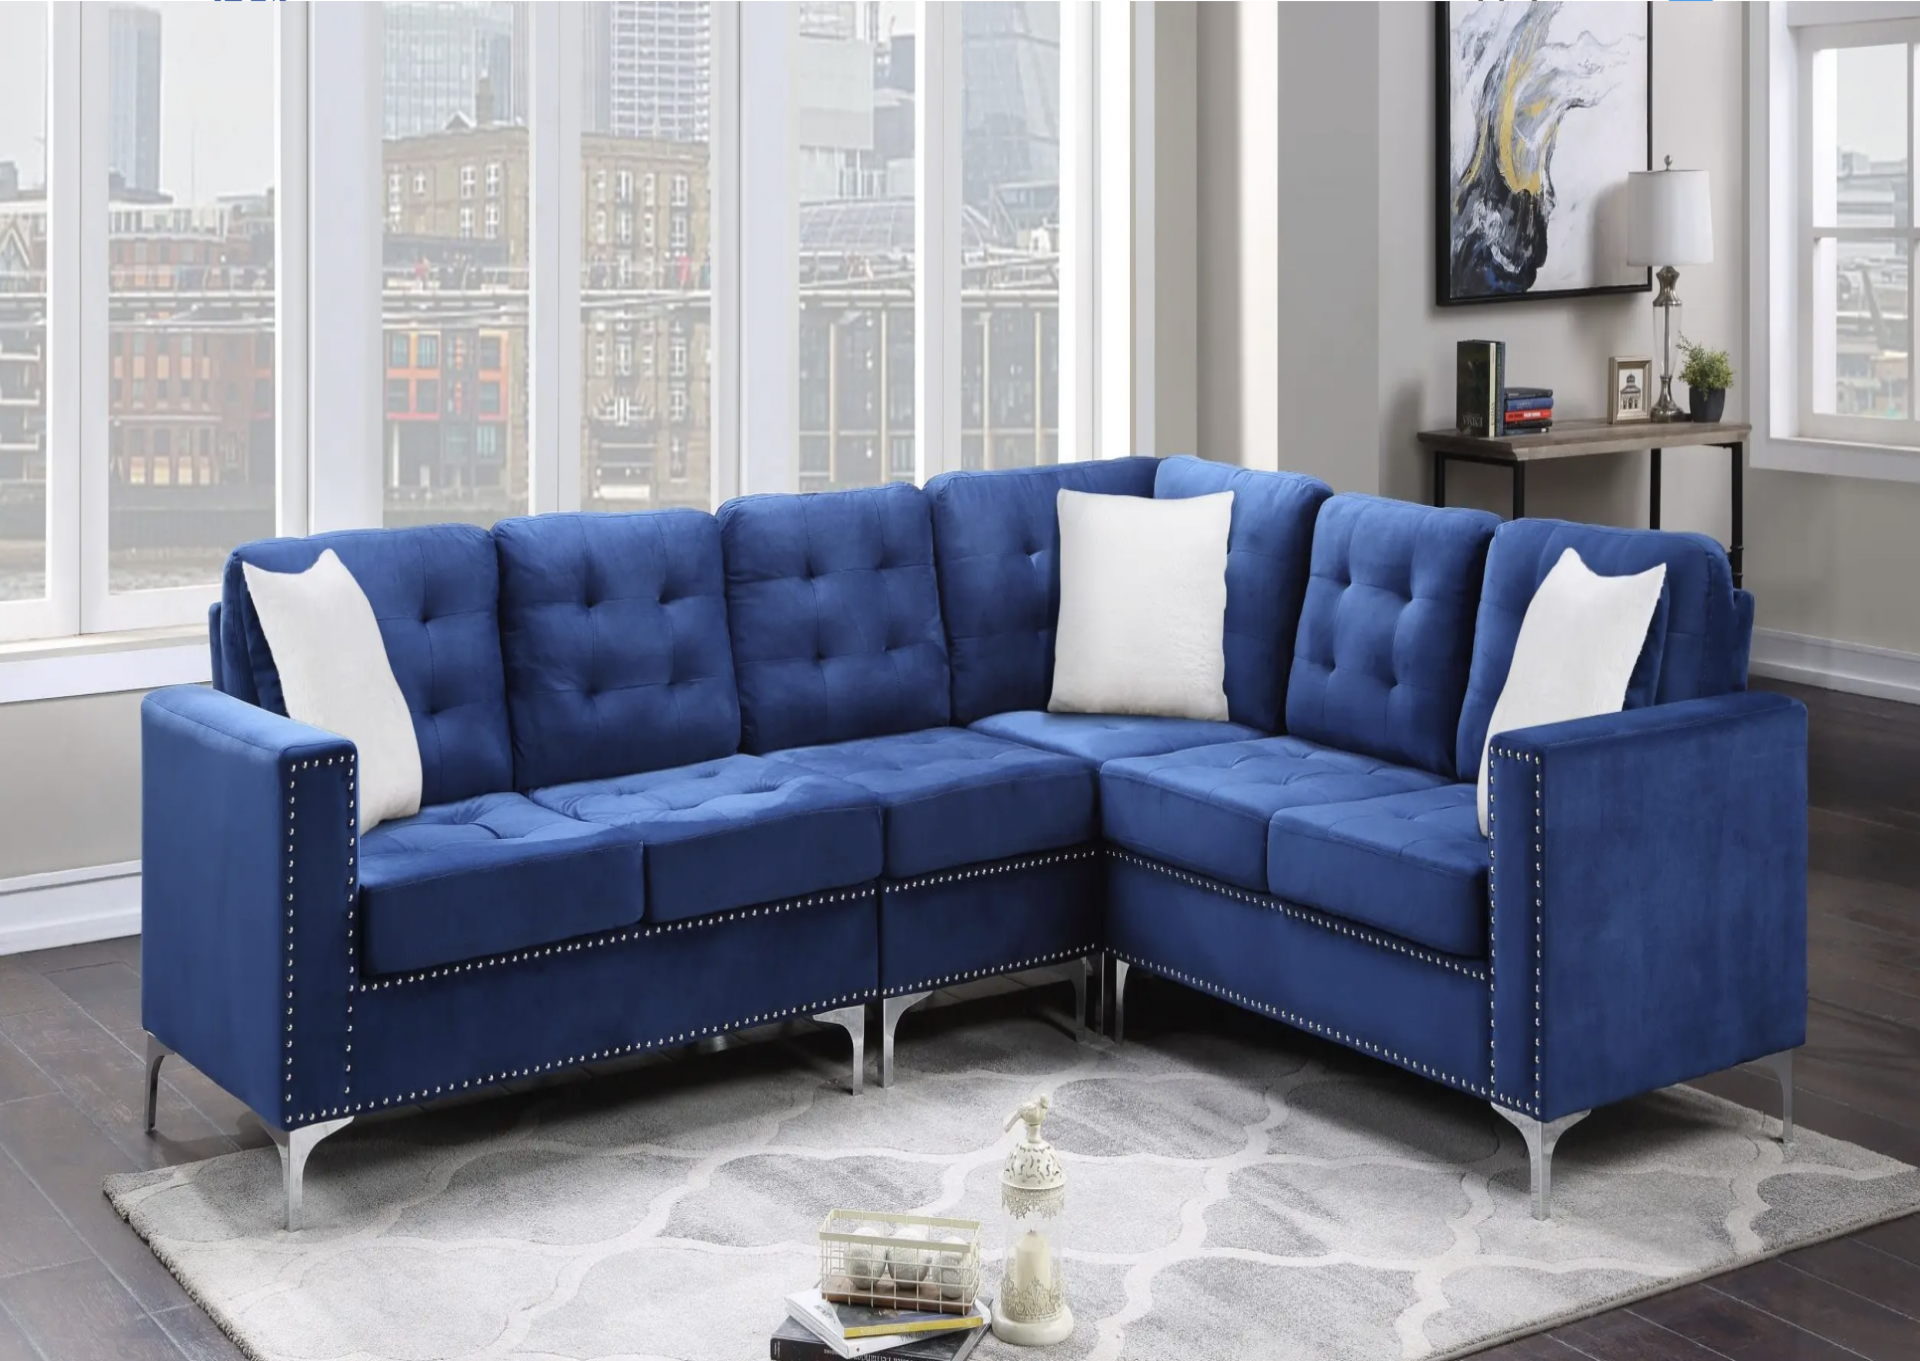 3 Piece Sectional Sofa,March Flyer